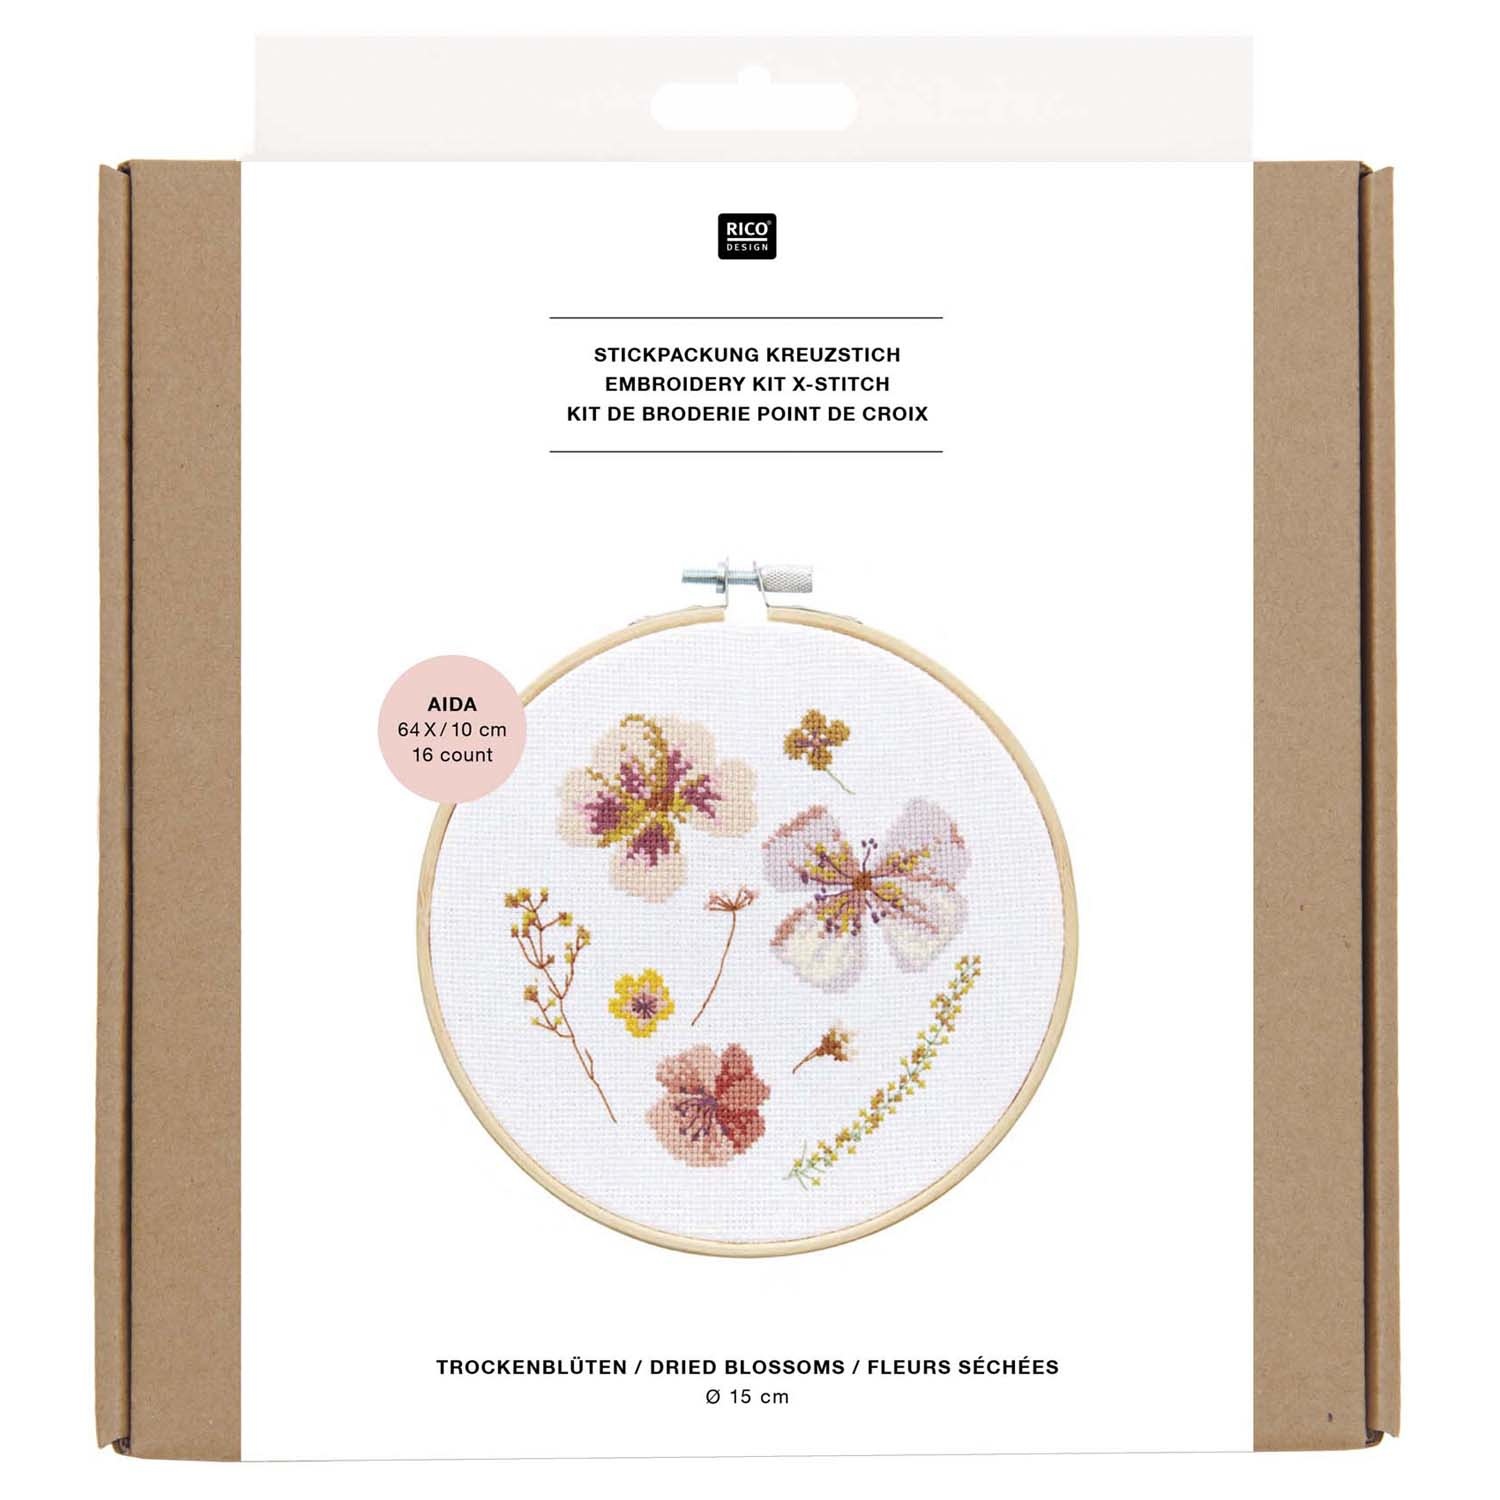 Rico NAY Embroidery kit transformation dried blossoms, picture Ø 15 cm, counted cross stitch